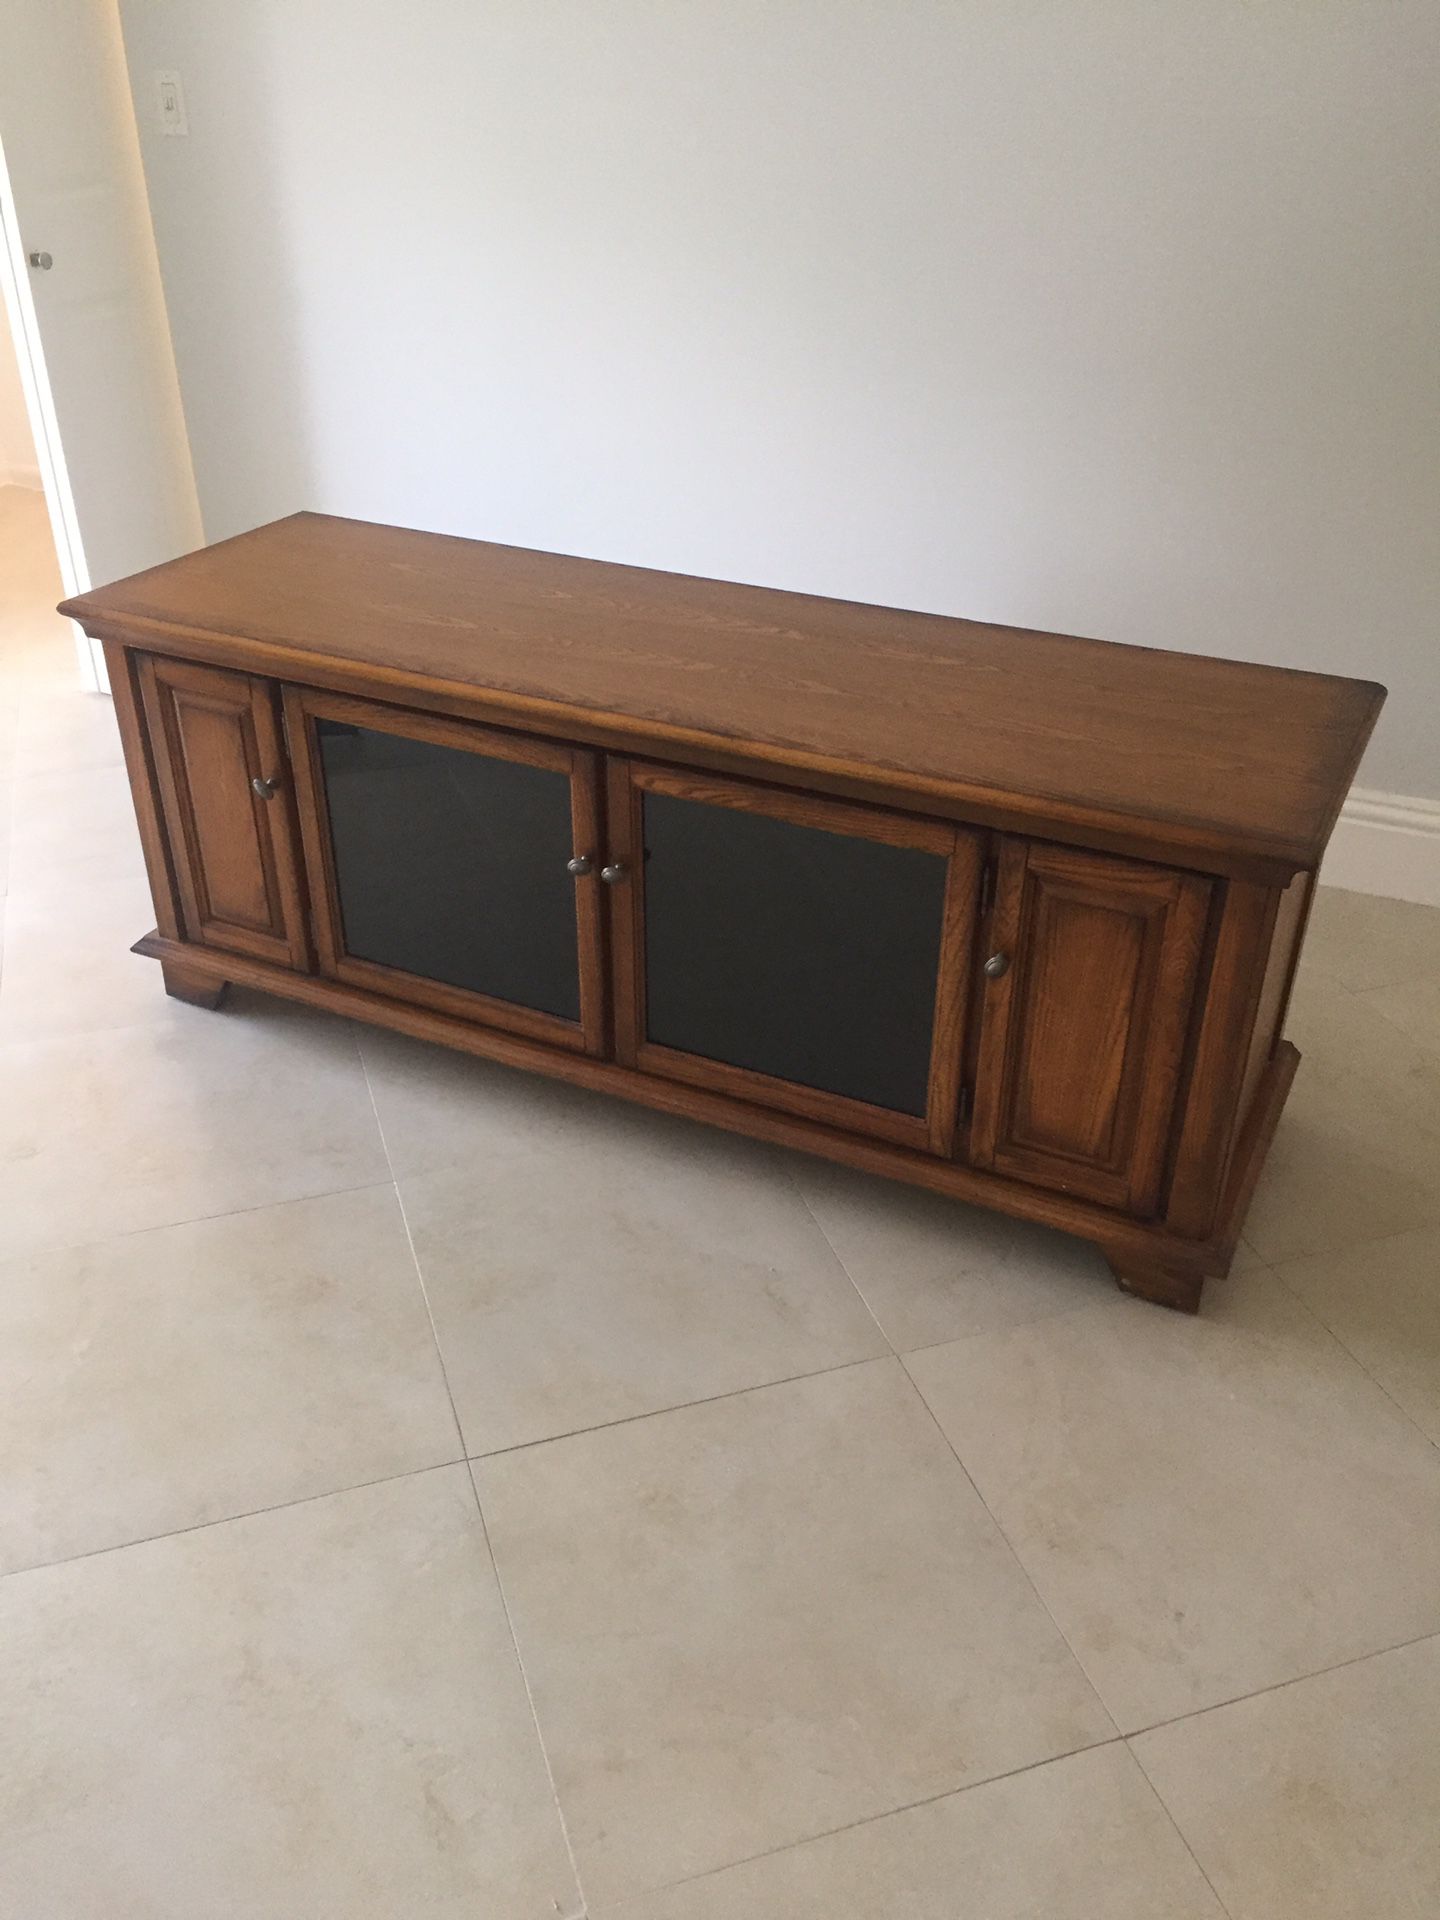 64” Long TV Stand